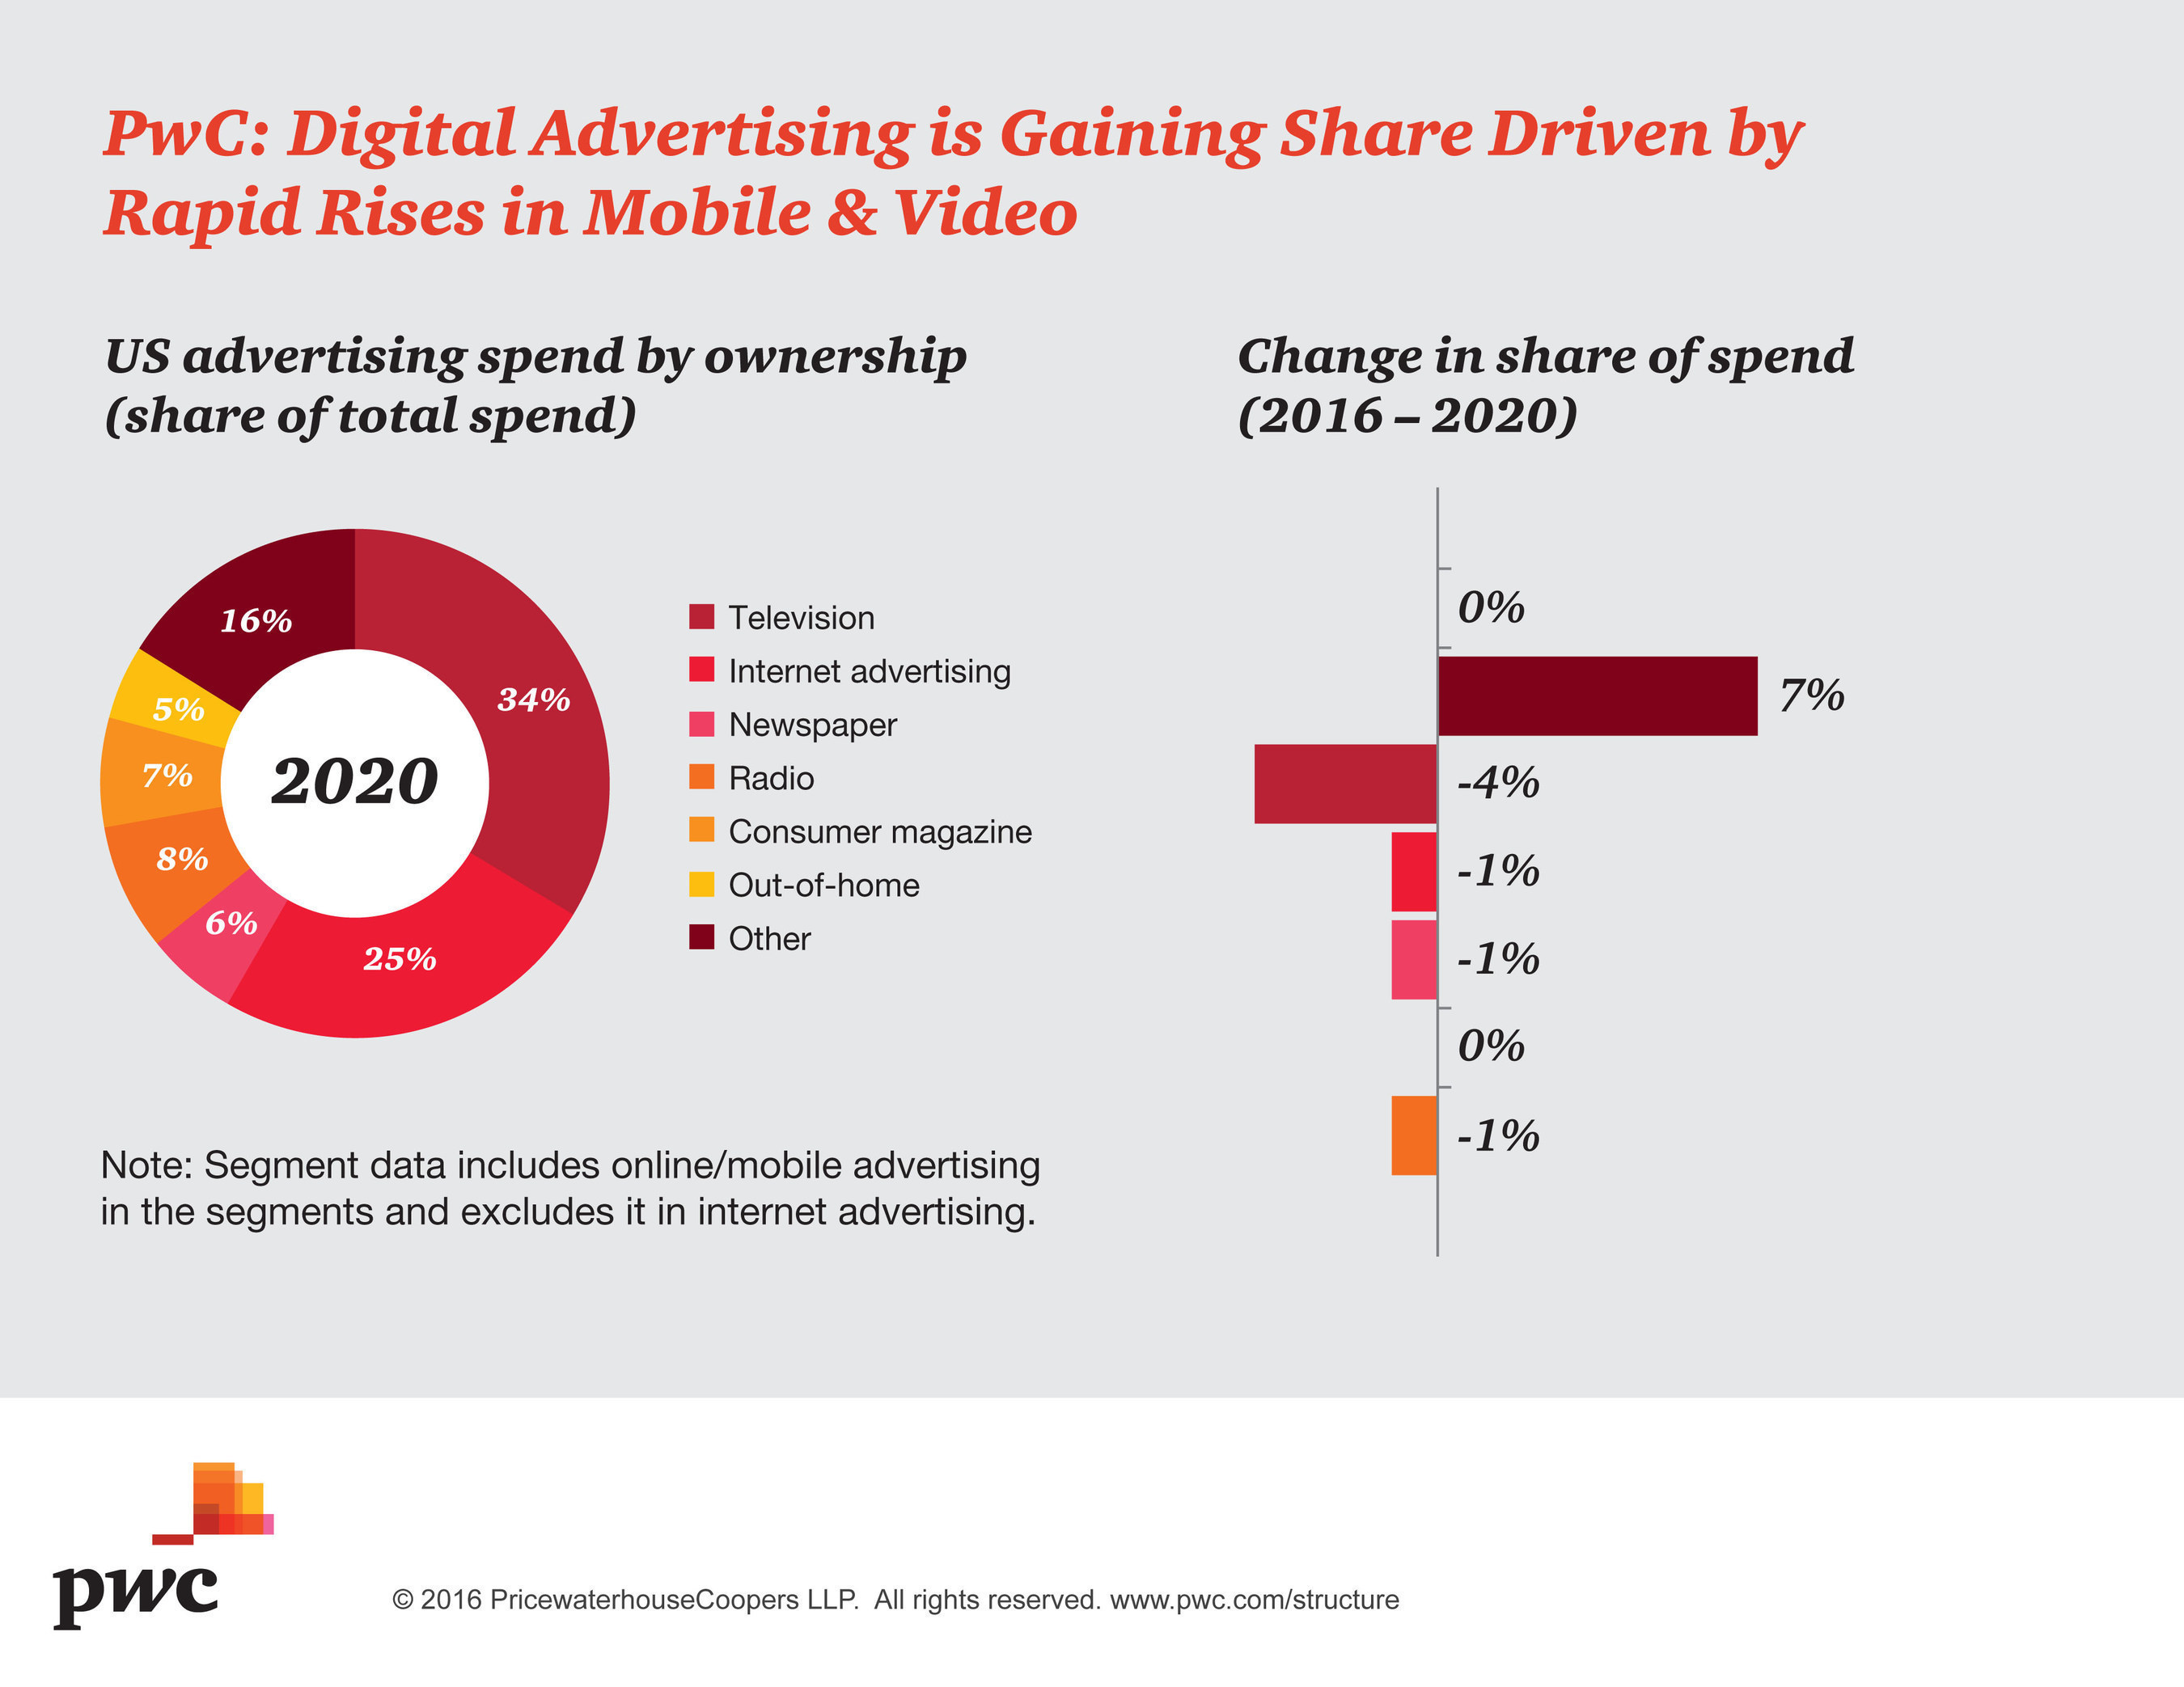 PwC US Entertainment & Media Outlook: Digital Advertising Gains Share Driven By Rapid Rise in Mobile and Video